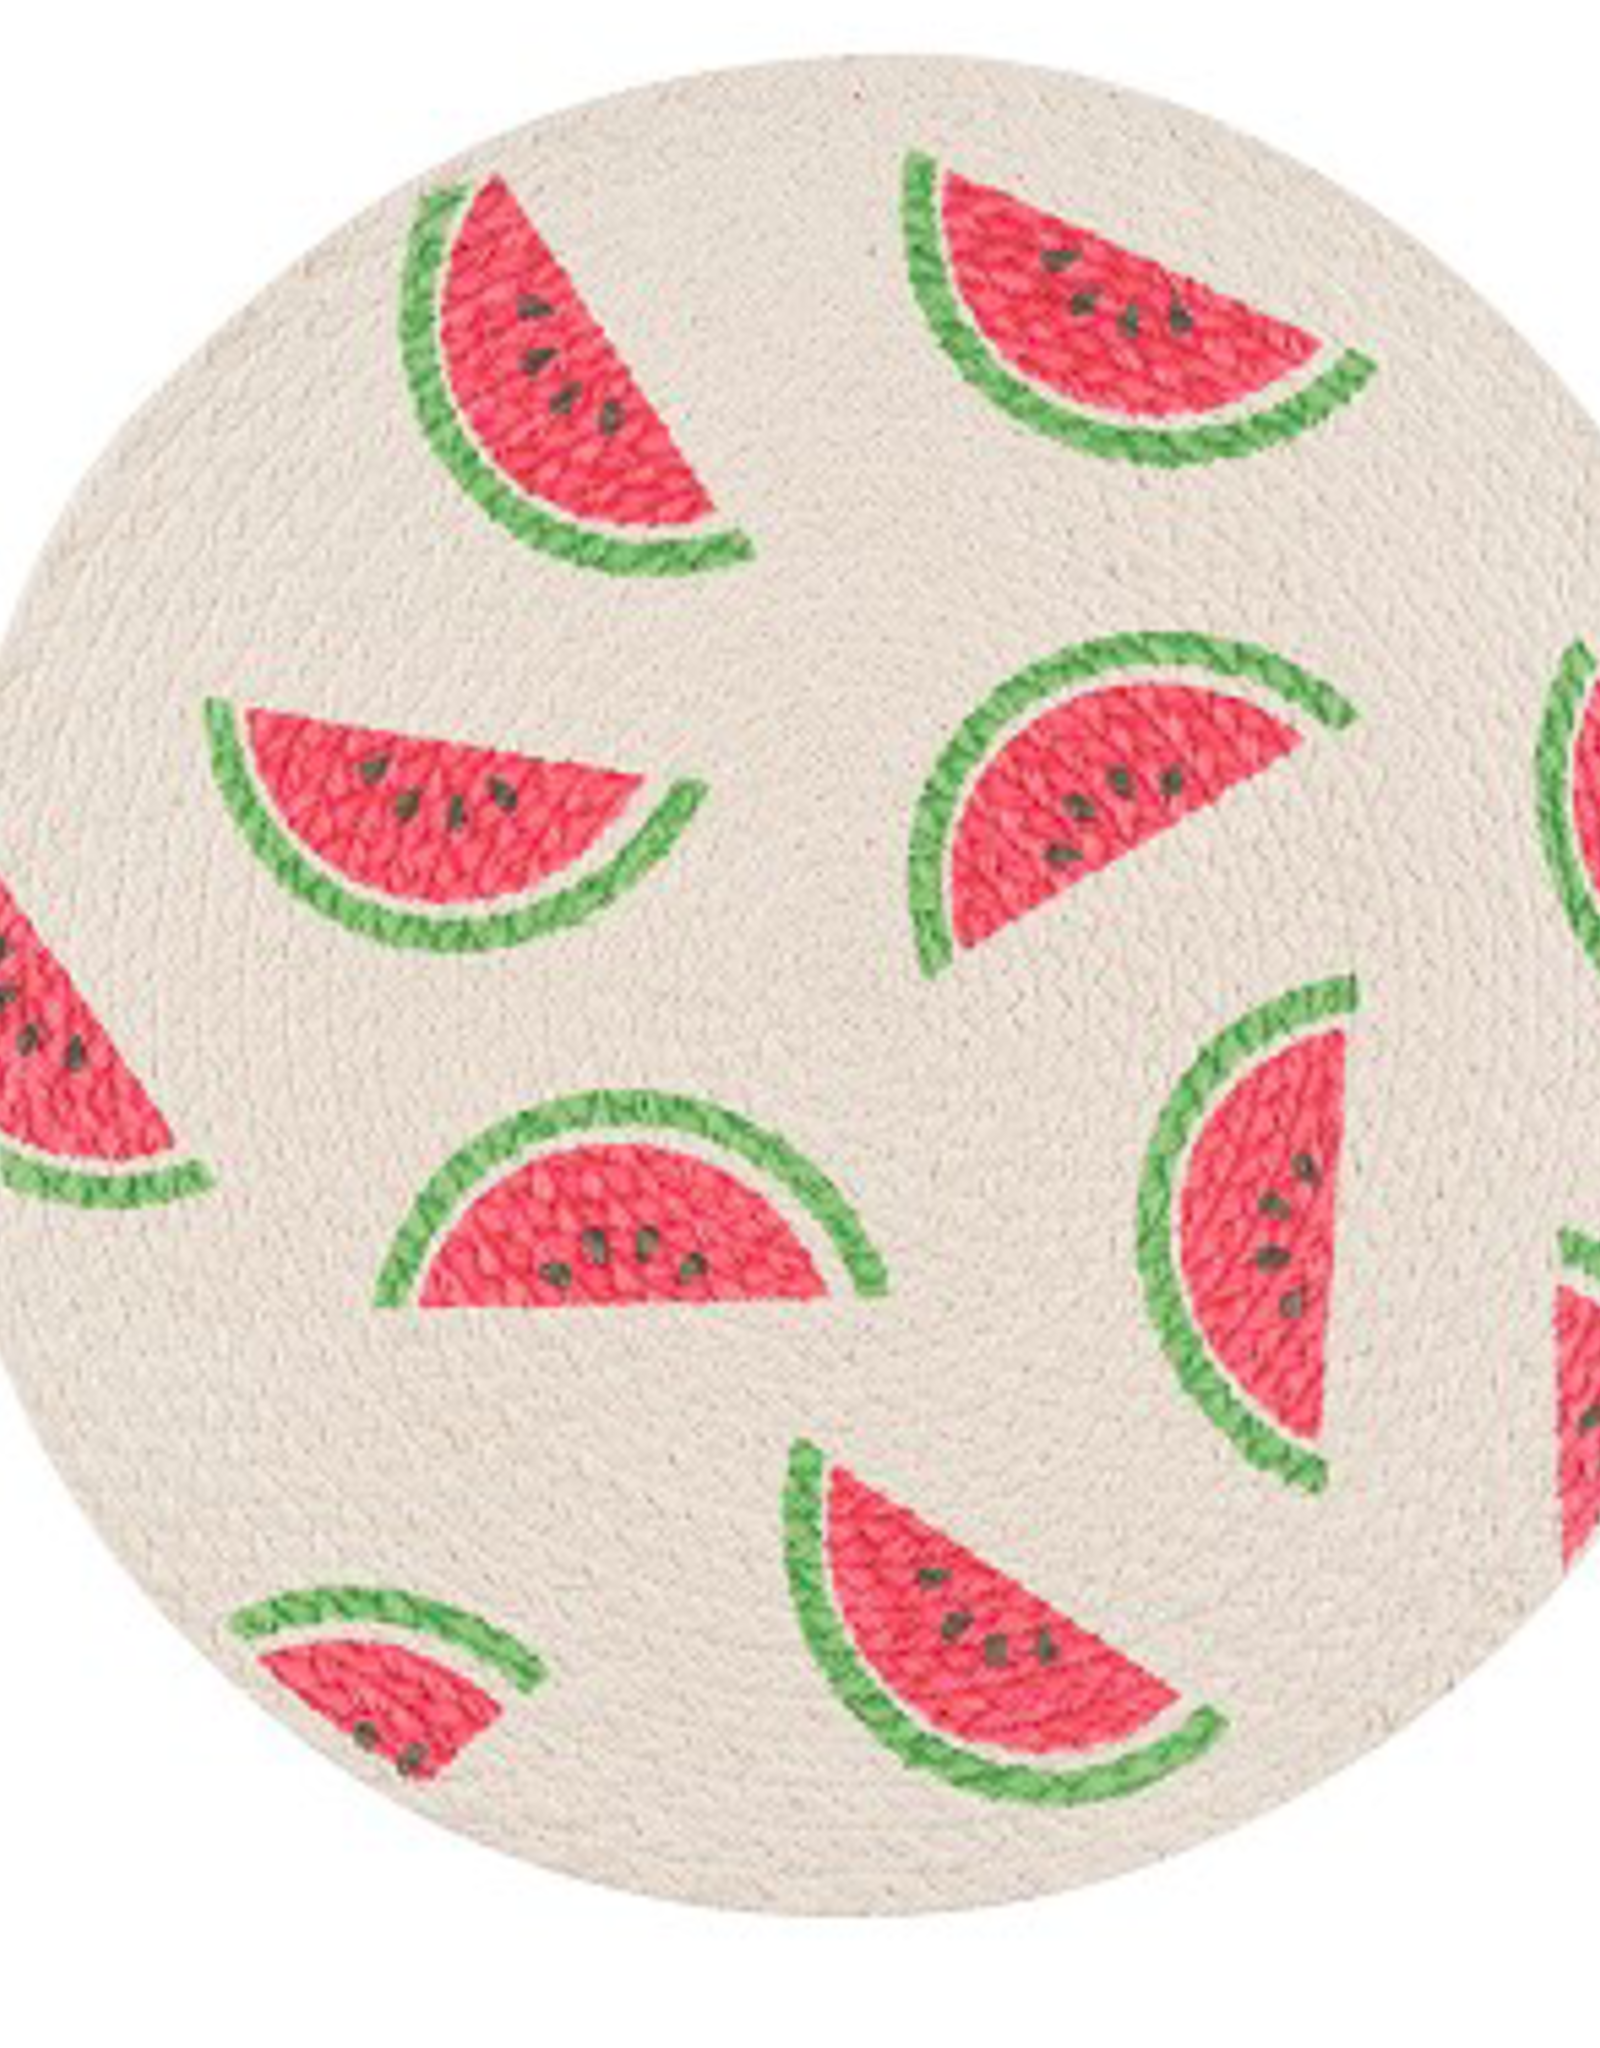 Watermelon Braided Placemat